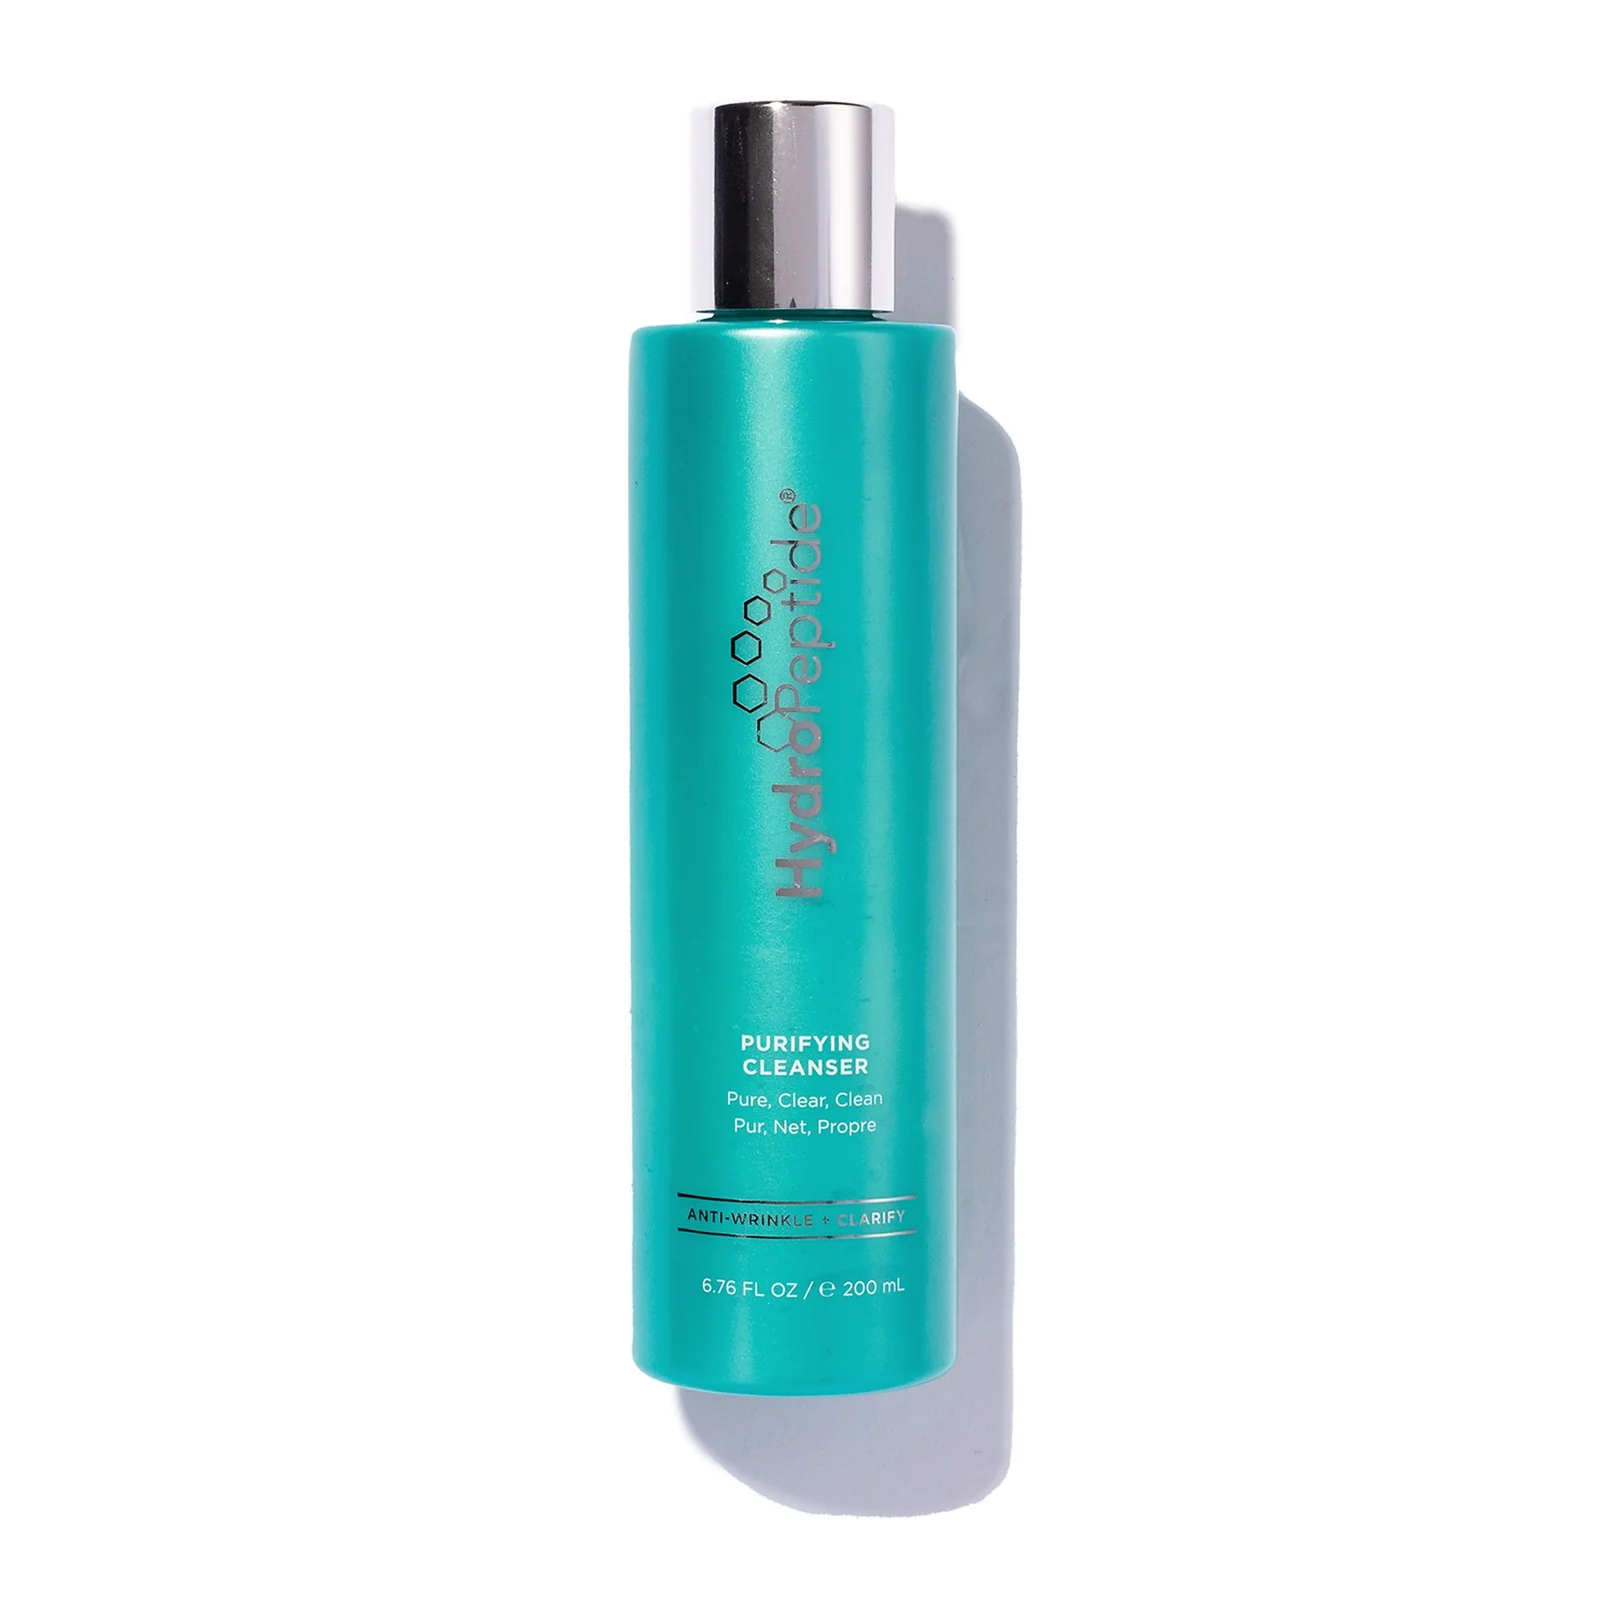 Hydropeptide Purifying Cleanser